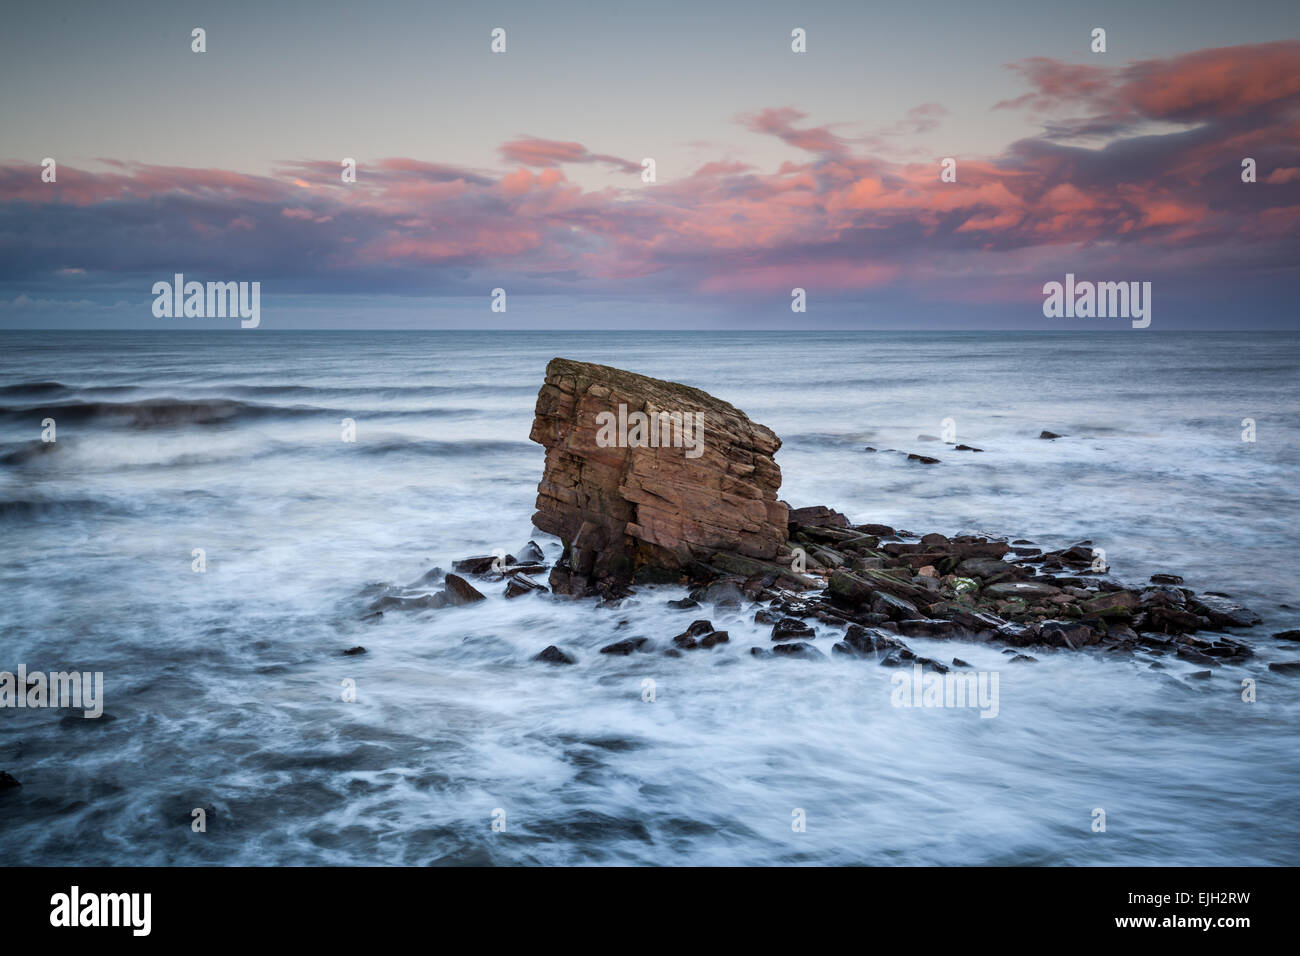 Charlie's Garden sea stack at Colywell Bay, Northumberland at sunset and high tide with rough seas crashing around the rocks. Stock Photo